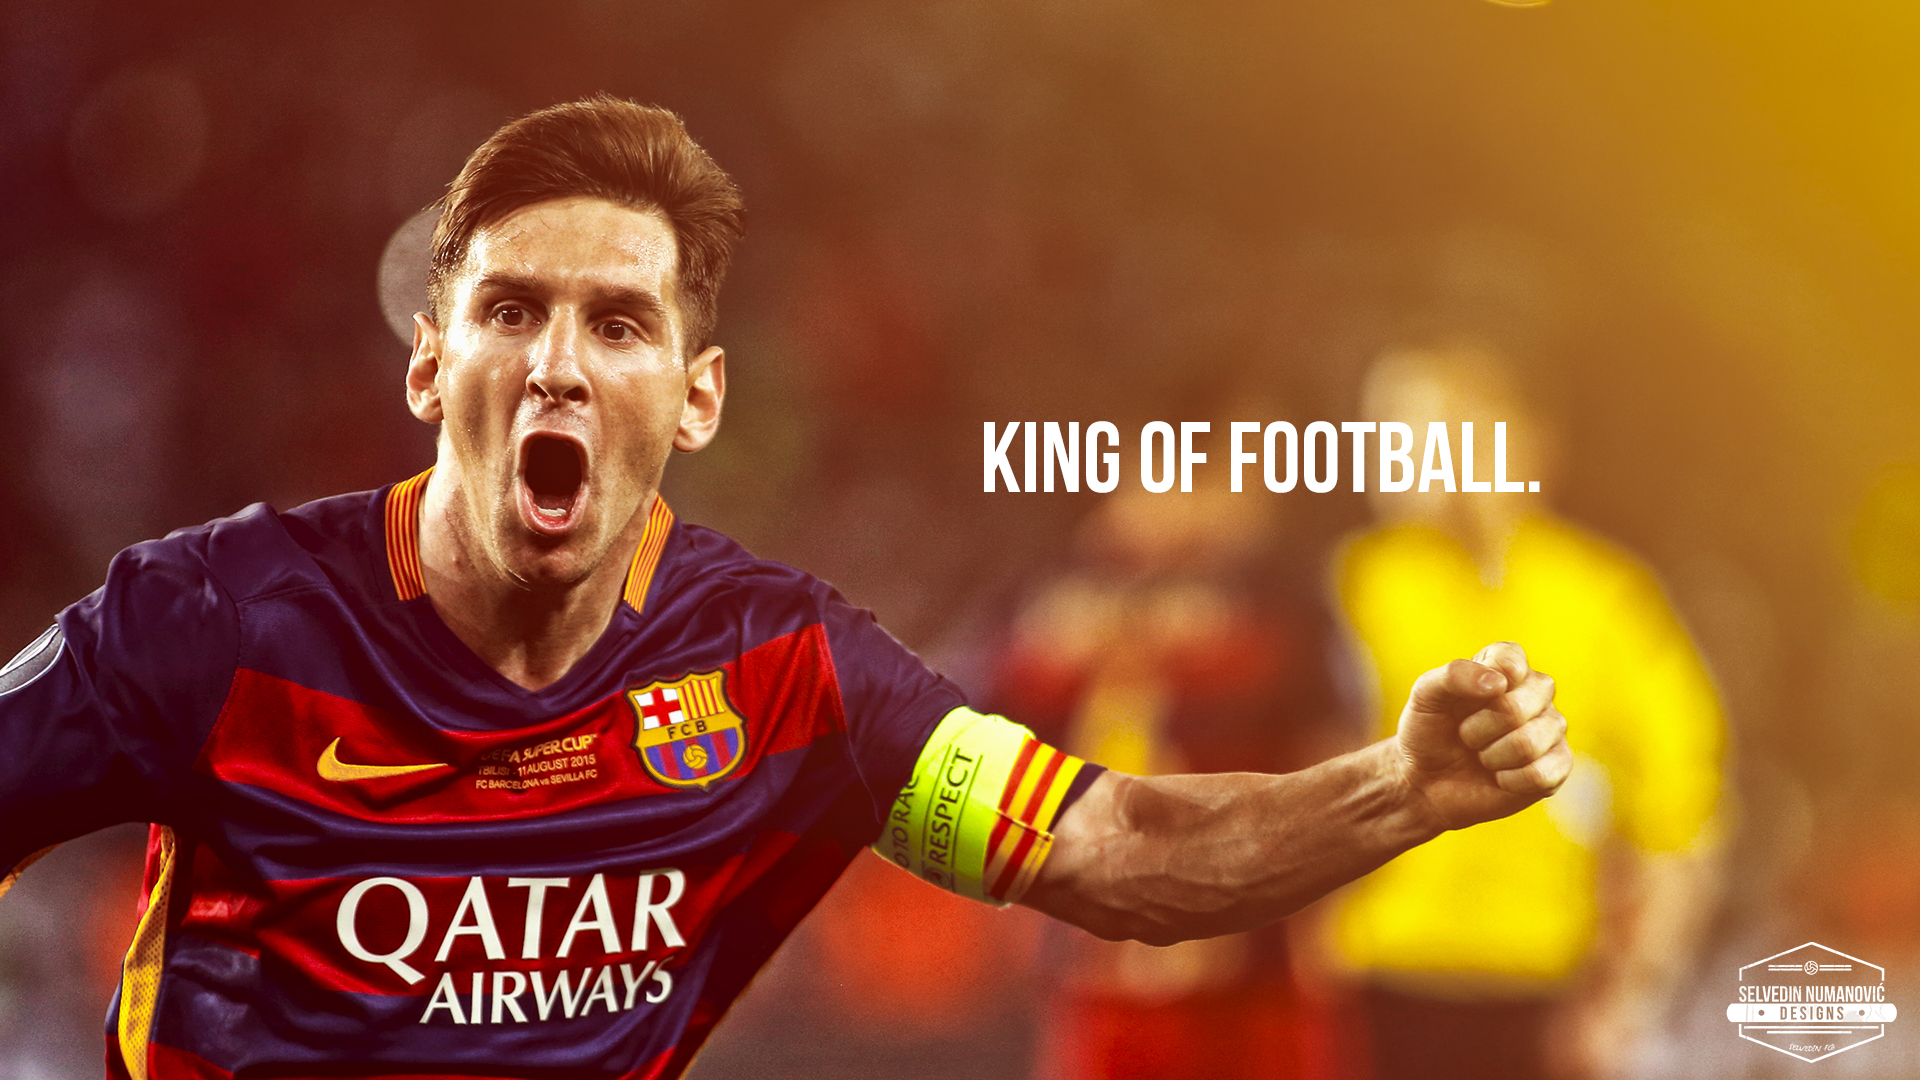 Lionel Messi Wallpaper Pictures Image